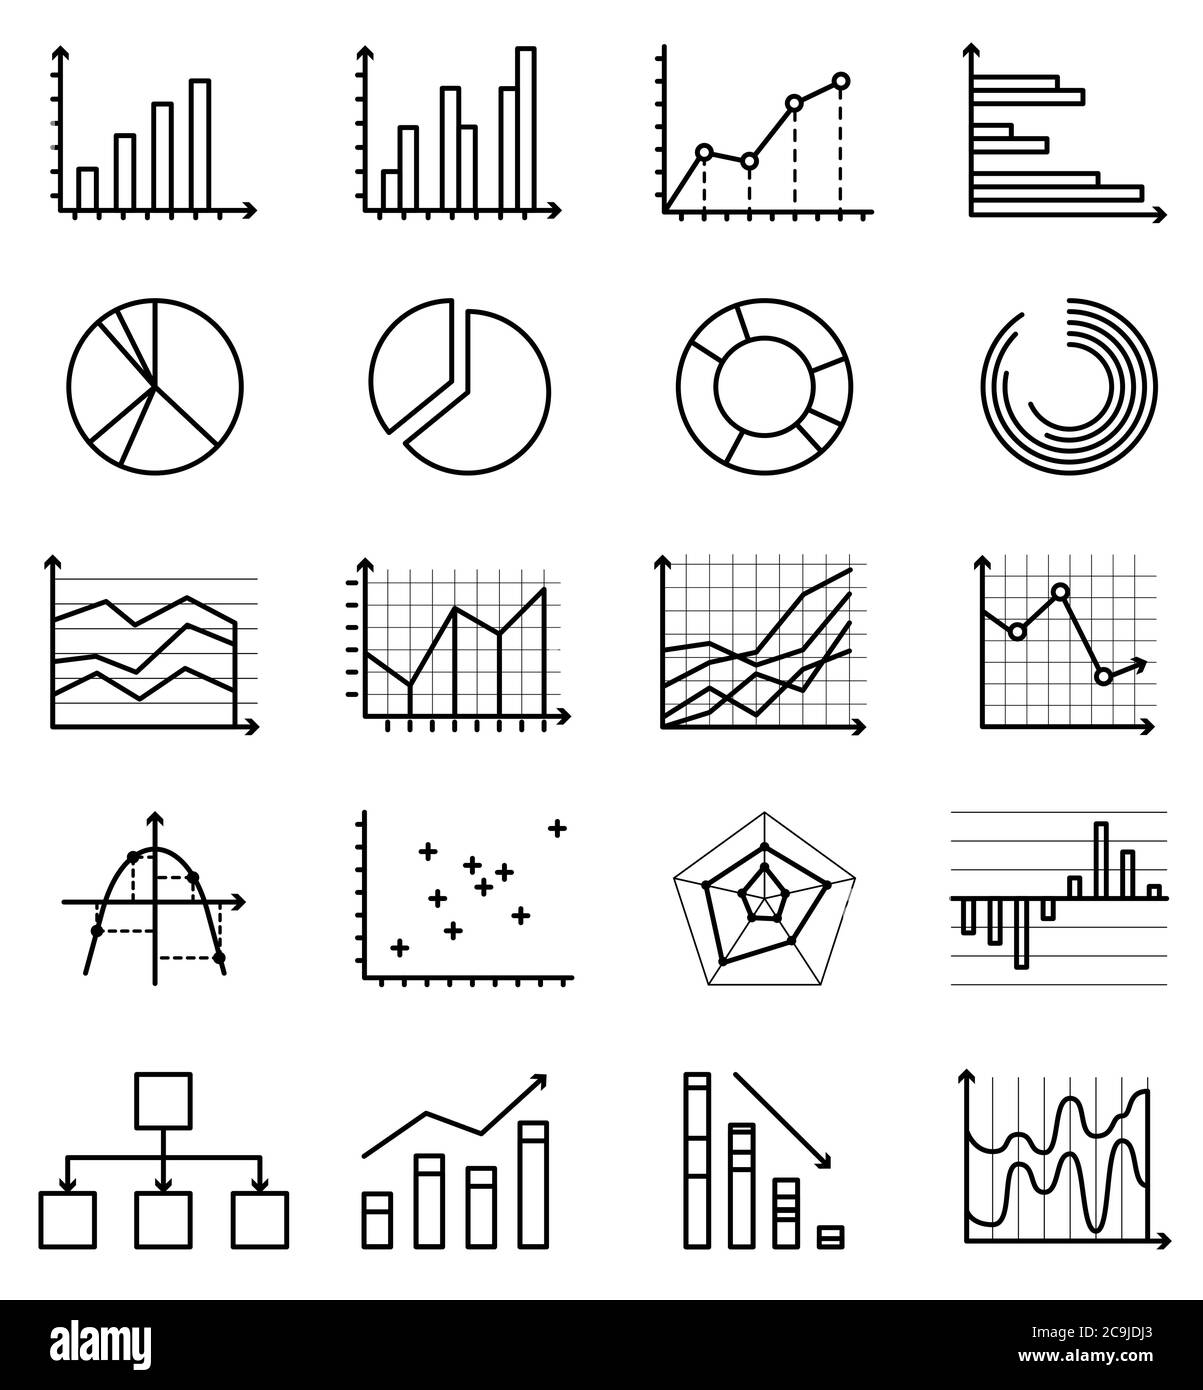 Vector outline isolated icons of graphs, schemes, schedules Stock Vector